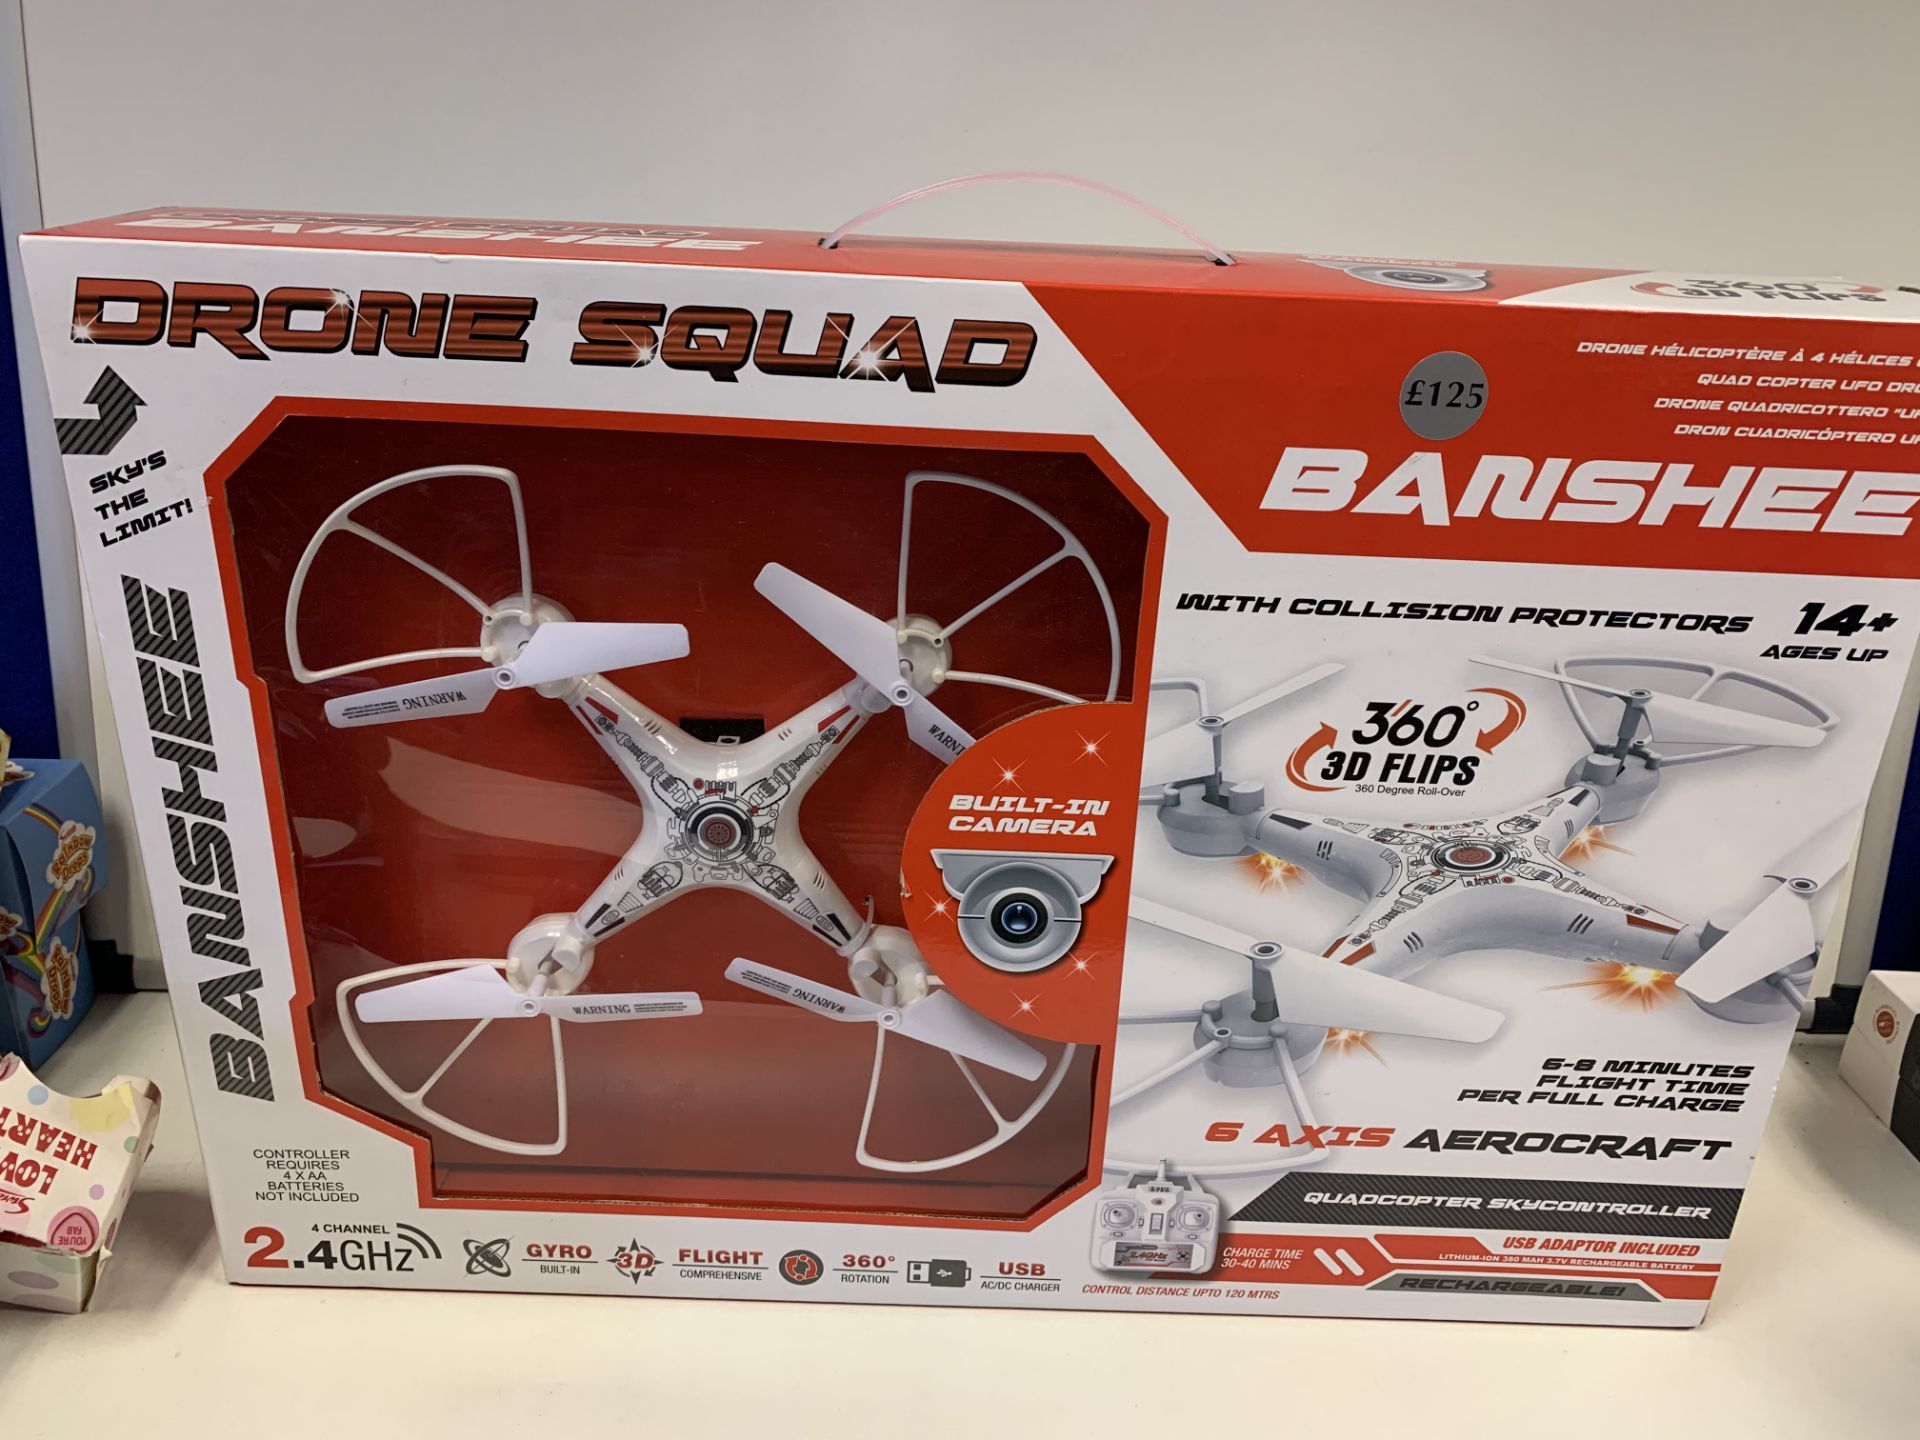 3 x BRAND NEW BANSHEE DRONE SQUAD 6 AXIS AEROCRAFT WITH BUILT IN CAMERA. USB ADAPTOR INCLUDED.